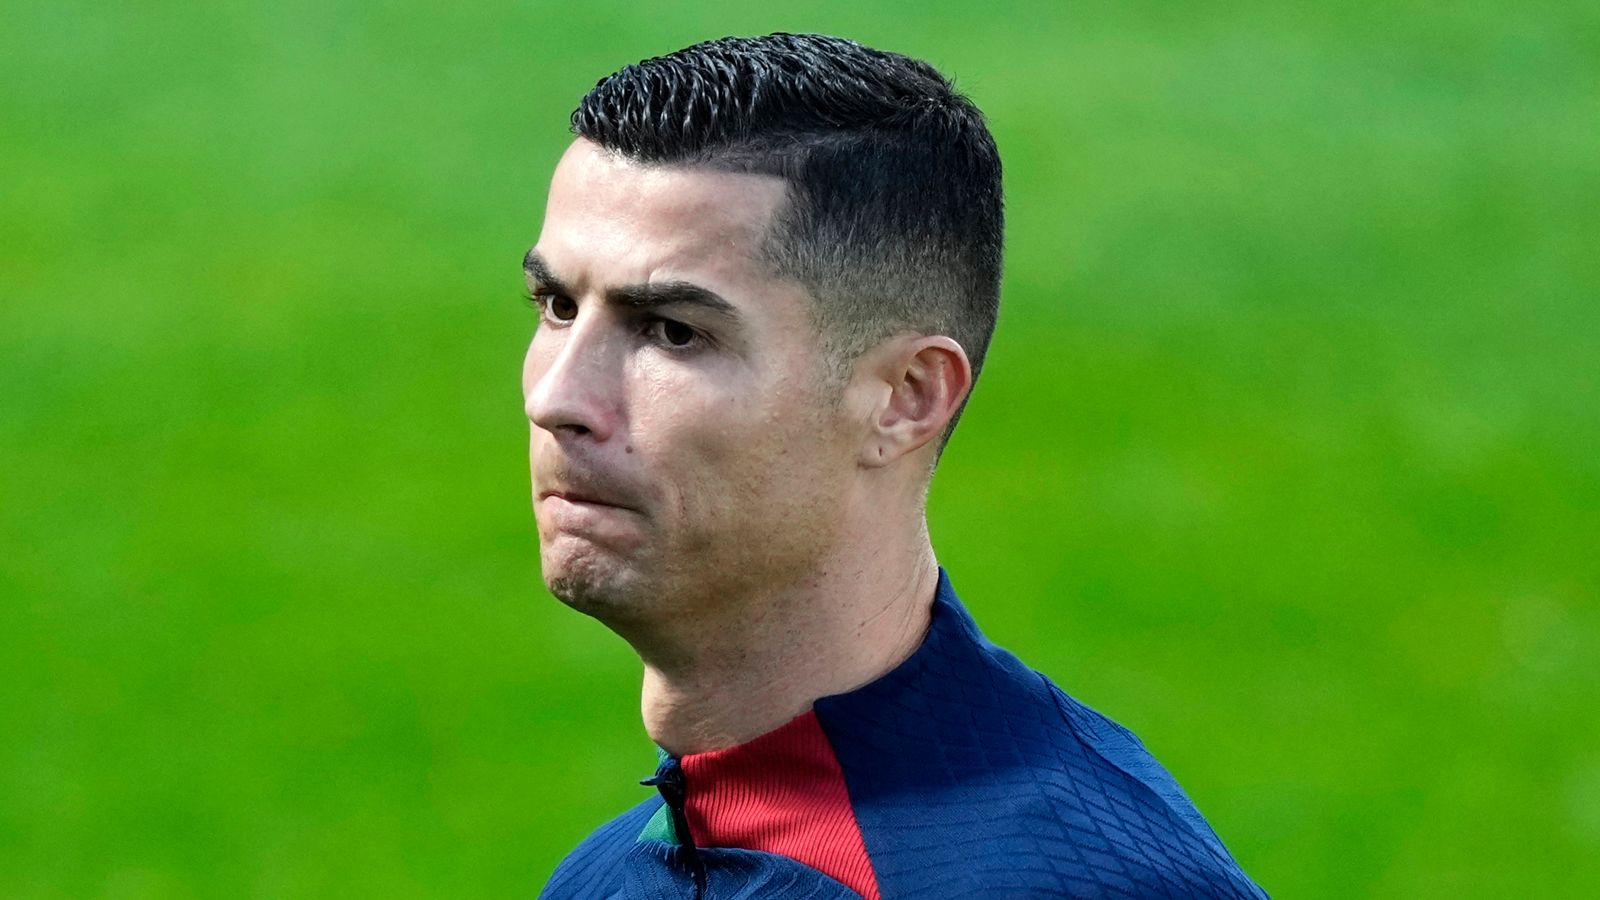 Cristiano Ronaldo faces new legal challenge from rape accuser over 2010 hush money deal